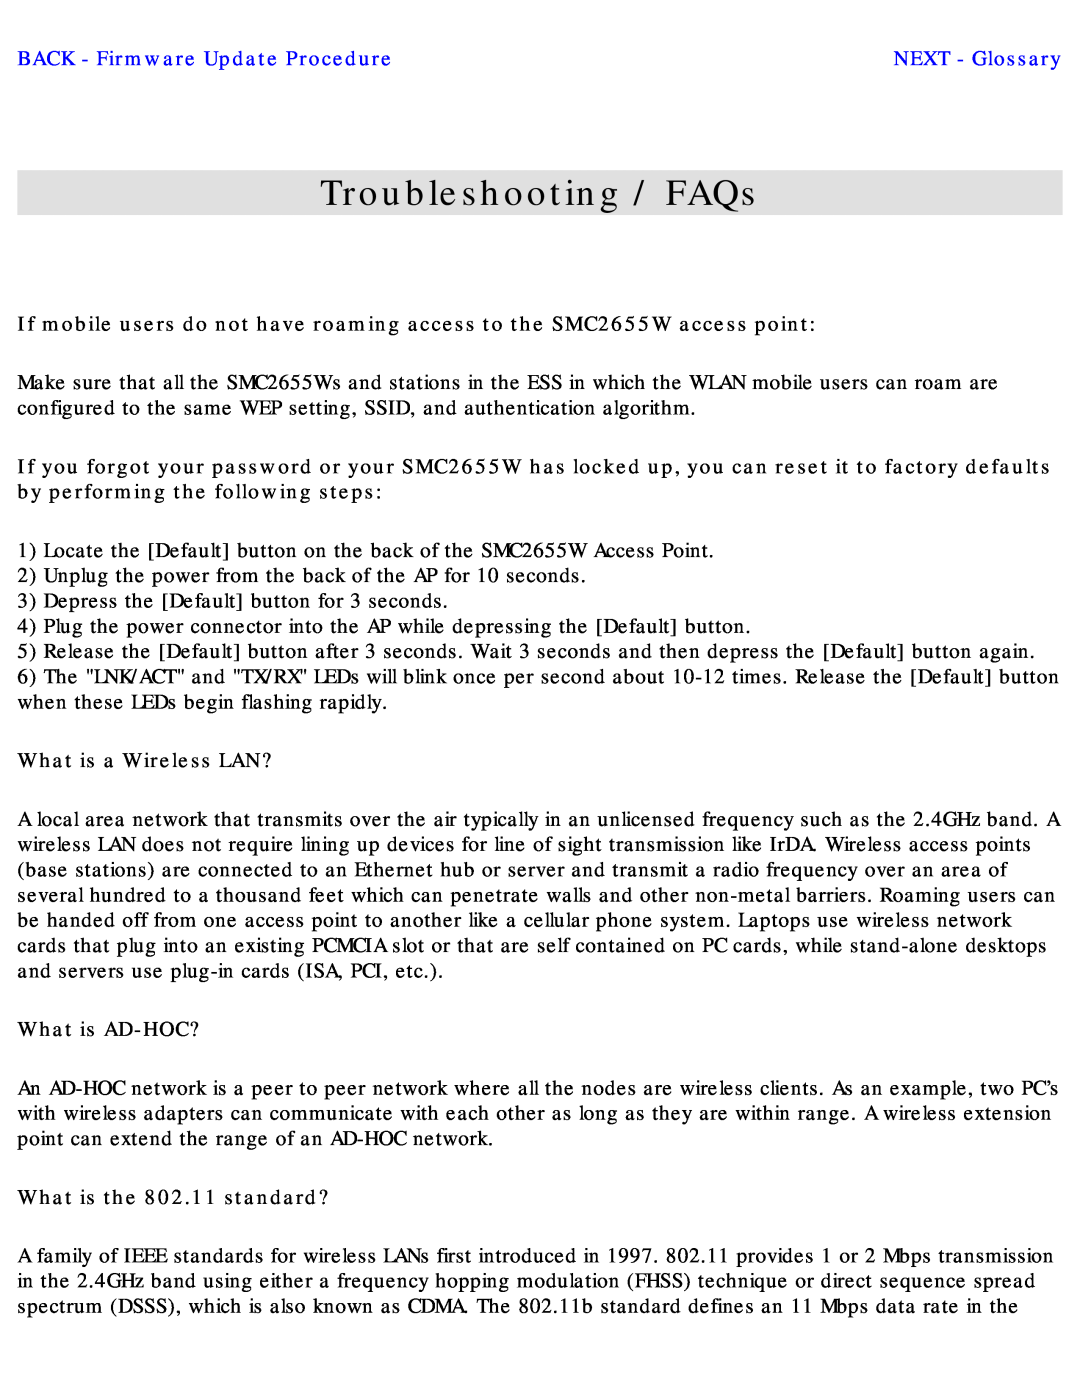 SMC Networks SMC2655W Troubleshooting / FAQs, BACK - Firmware Update Procedure, What is a Wireless LAN?, What is AD-HOC? 